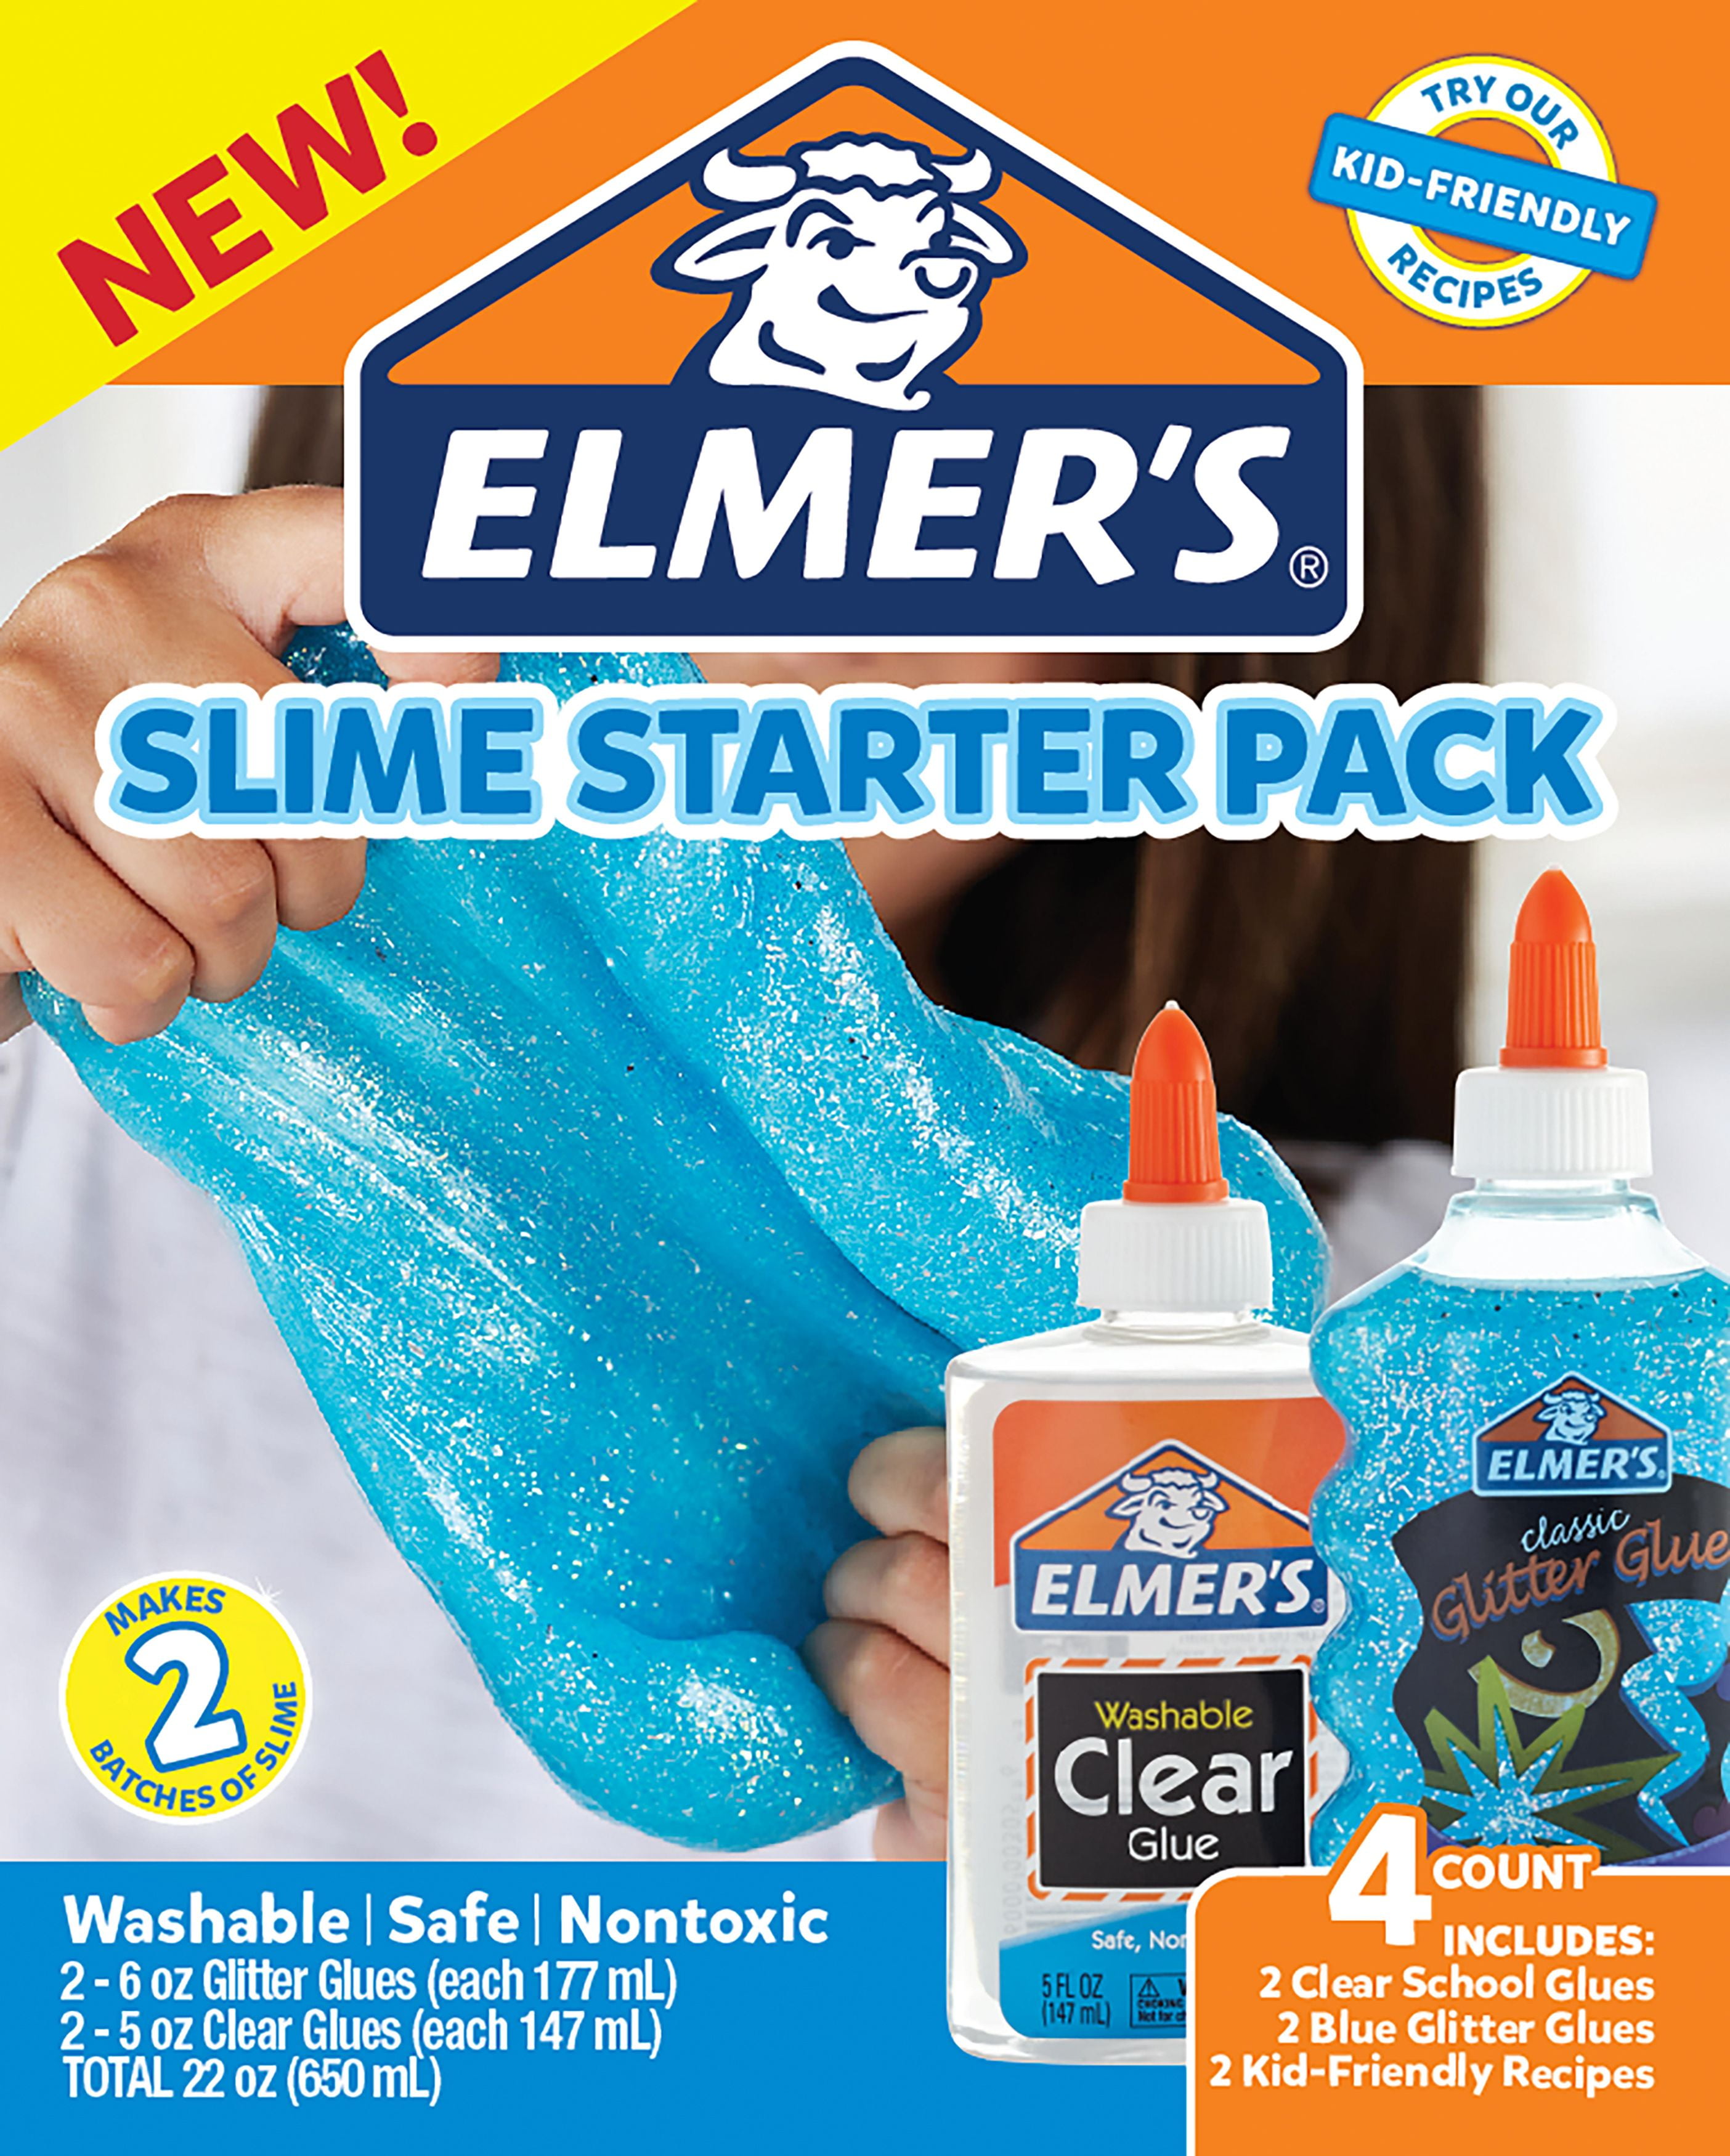 How to Make Slime With Elmer's Glue · Craftwhack